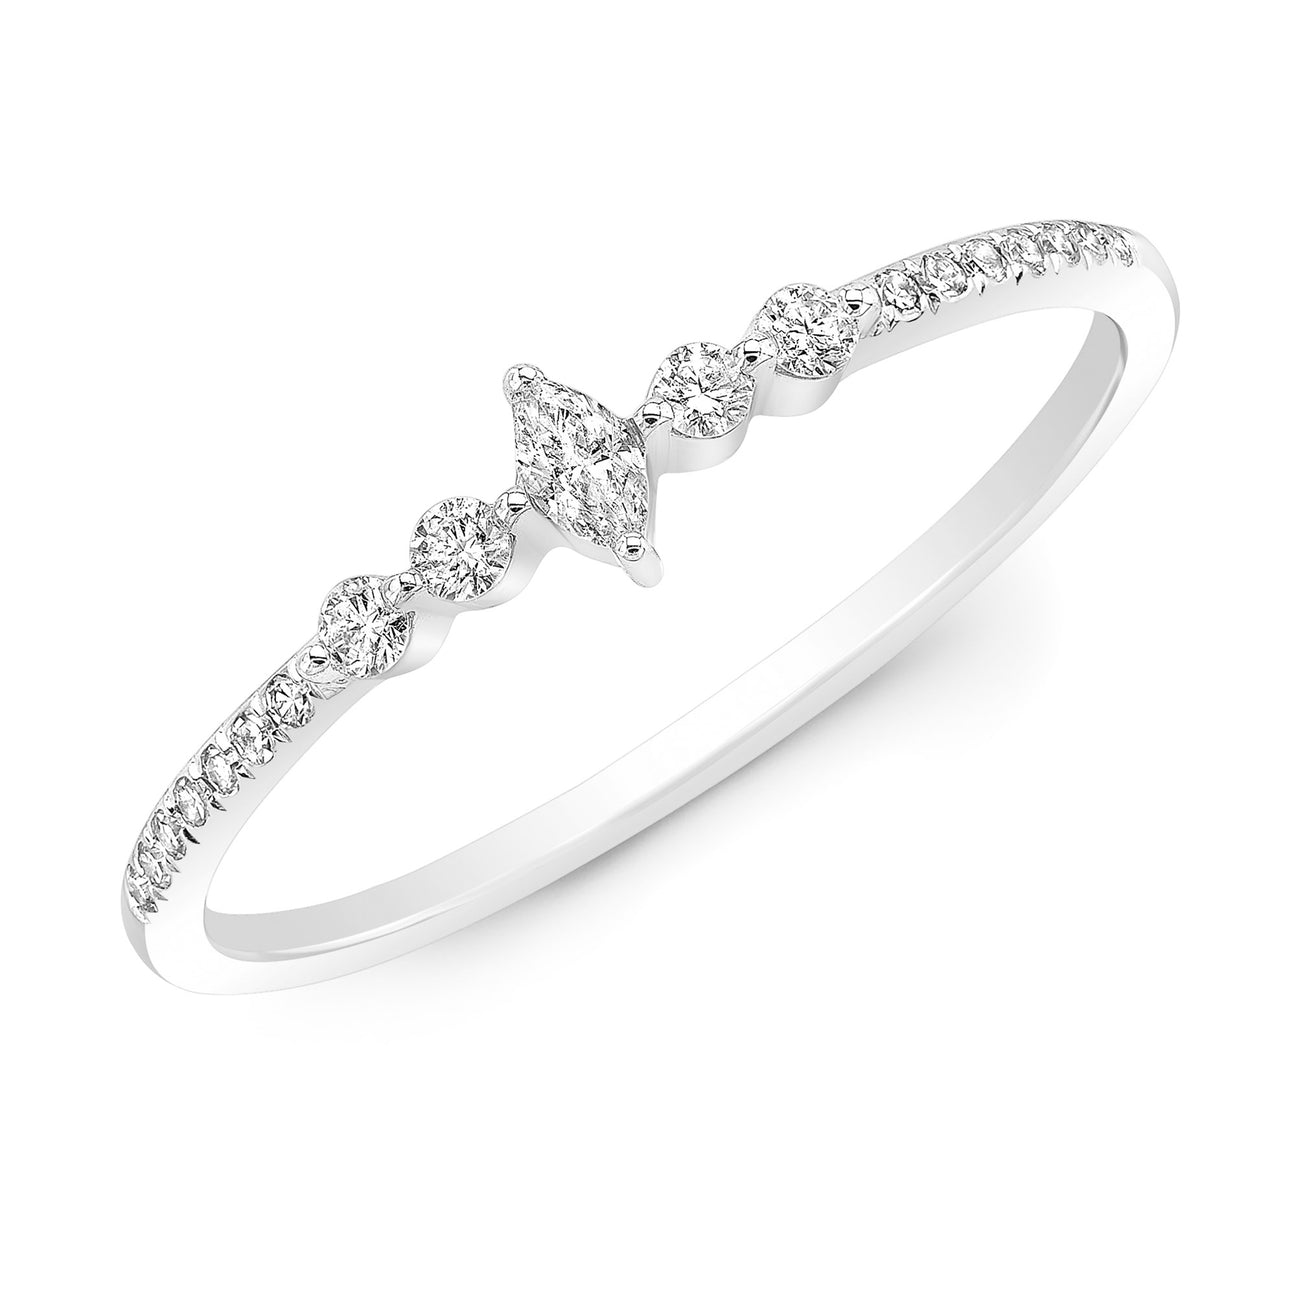 JustDesi Dainty Marquise Diamond Ring in White Gold